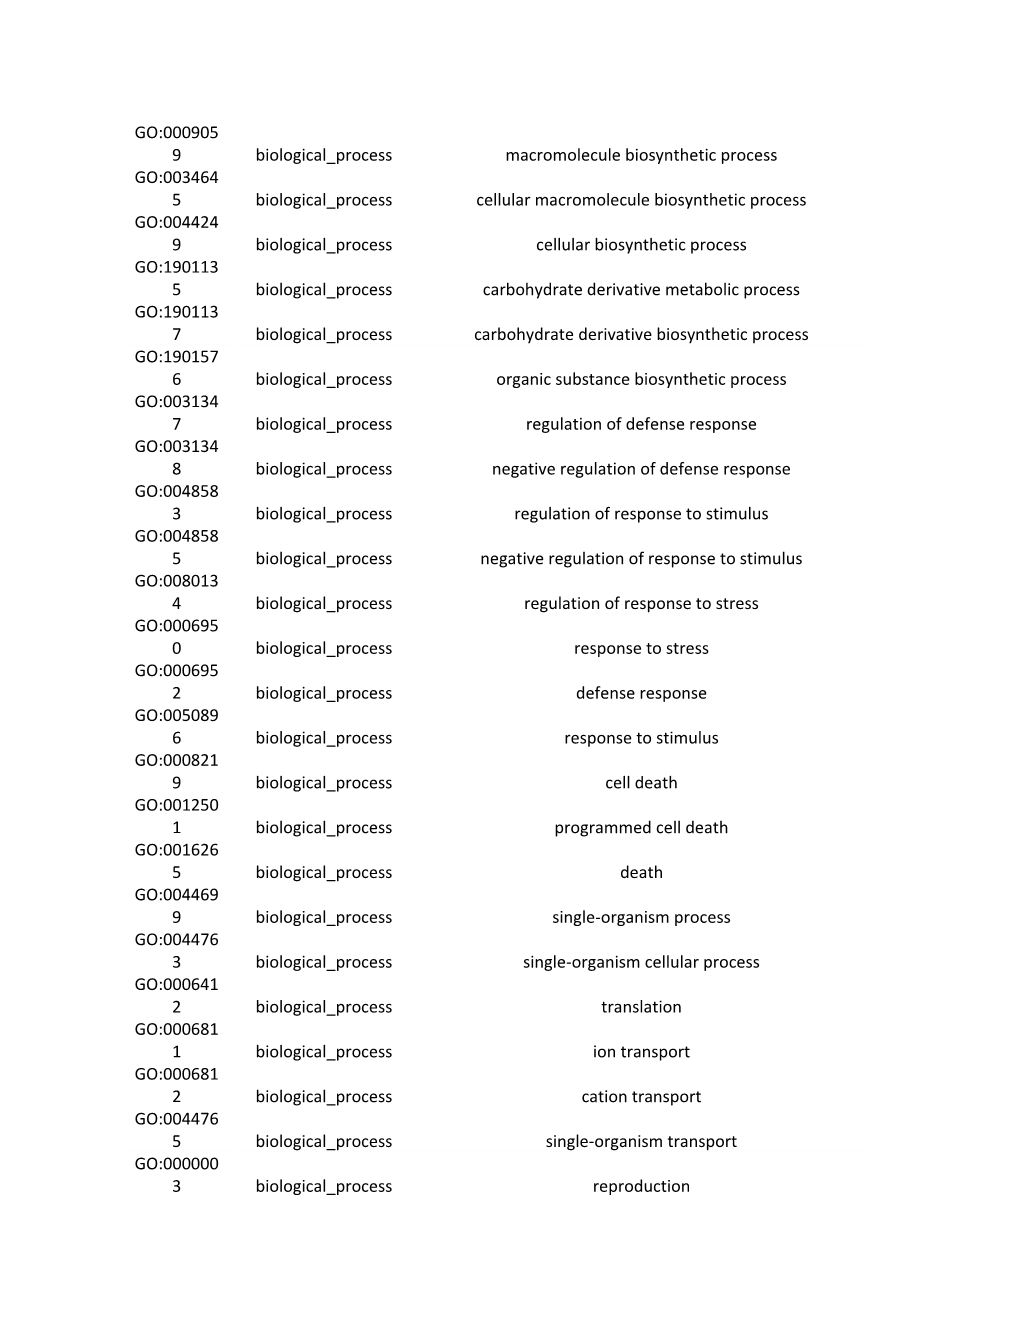 Supplementary Table 2. List of Significantly Enriched Gene Ontology Terms Among Transcripts